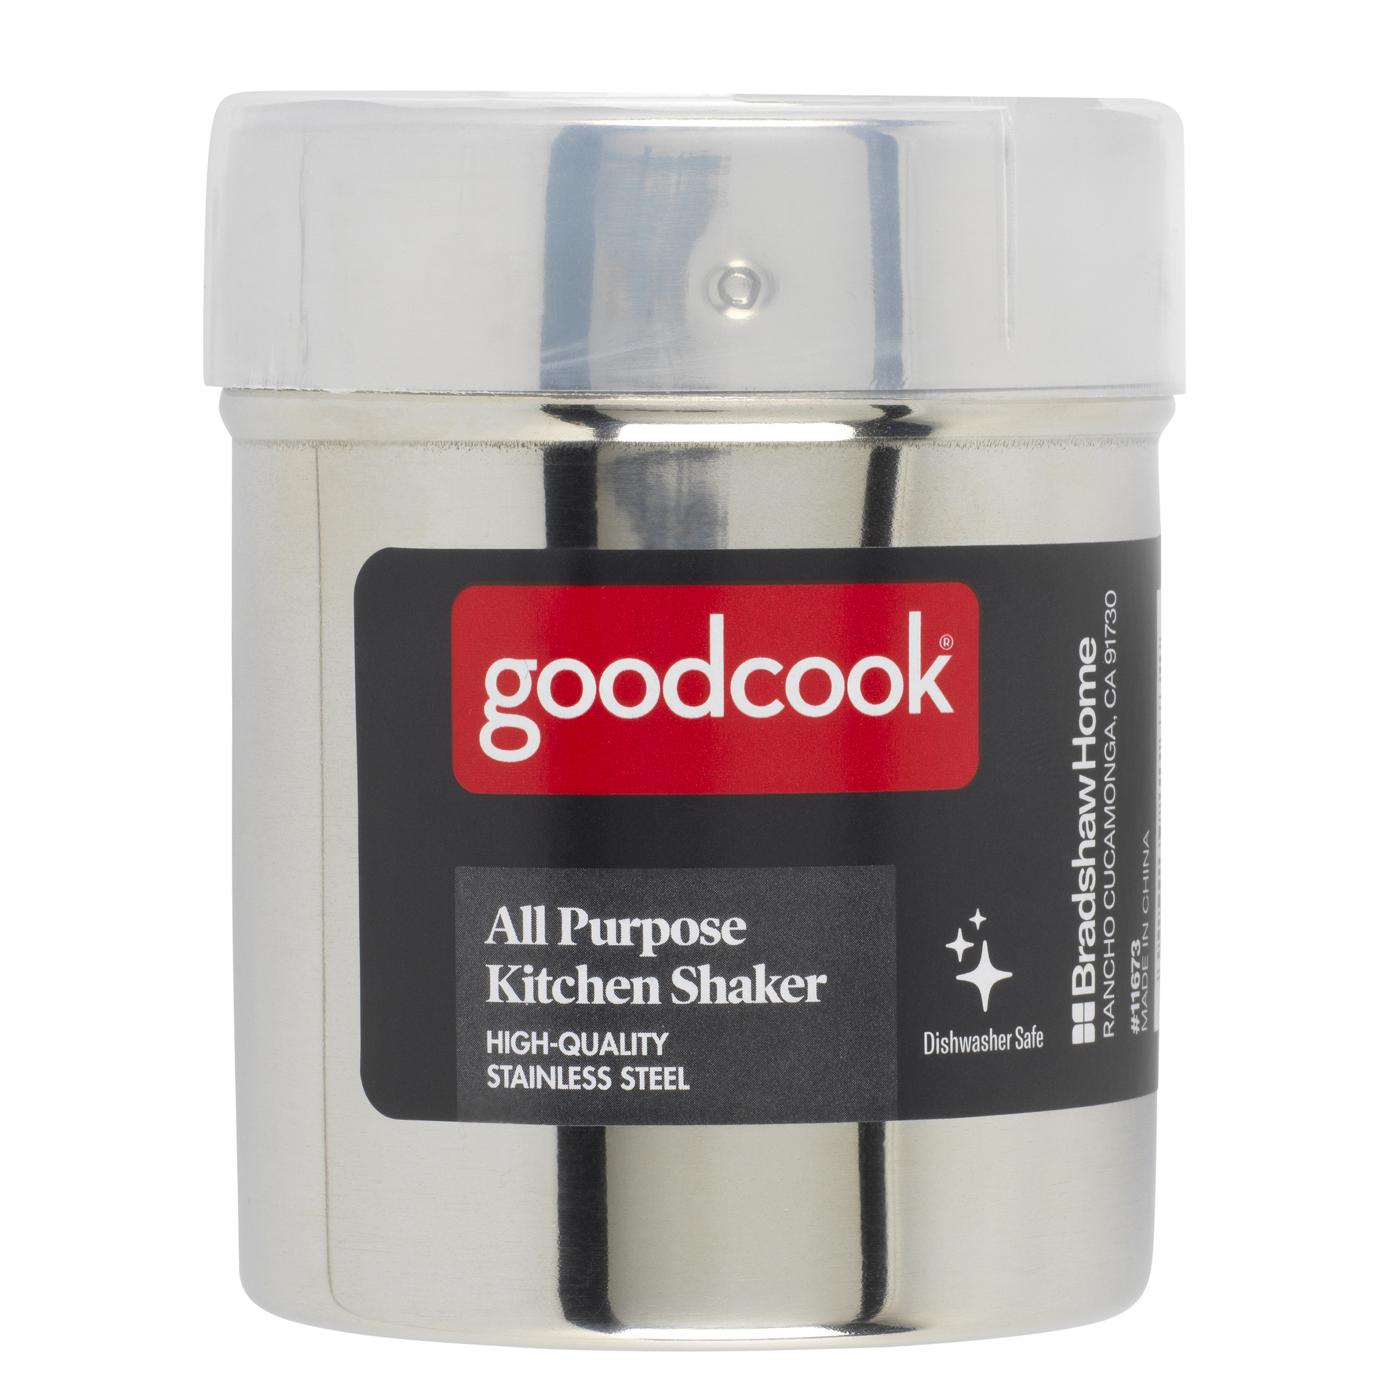 GoodCook Stainless Steel All Purpose Kitchen Shaker; image 1 of 3